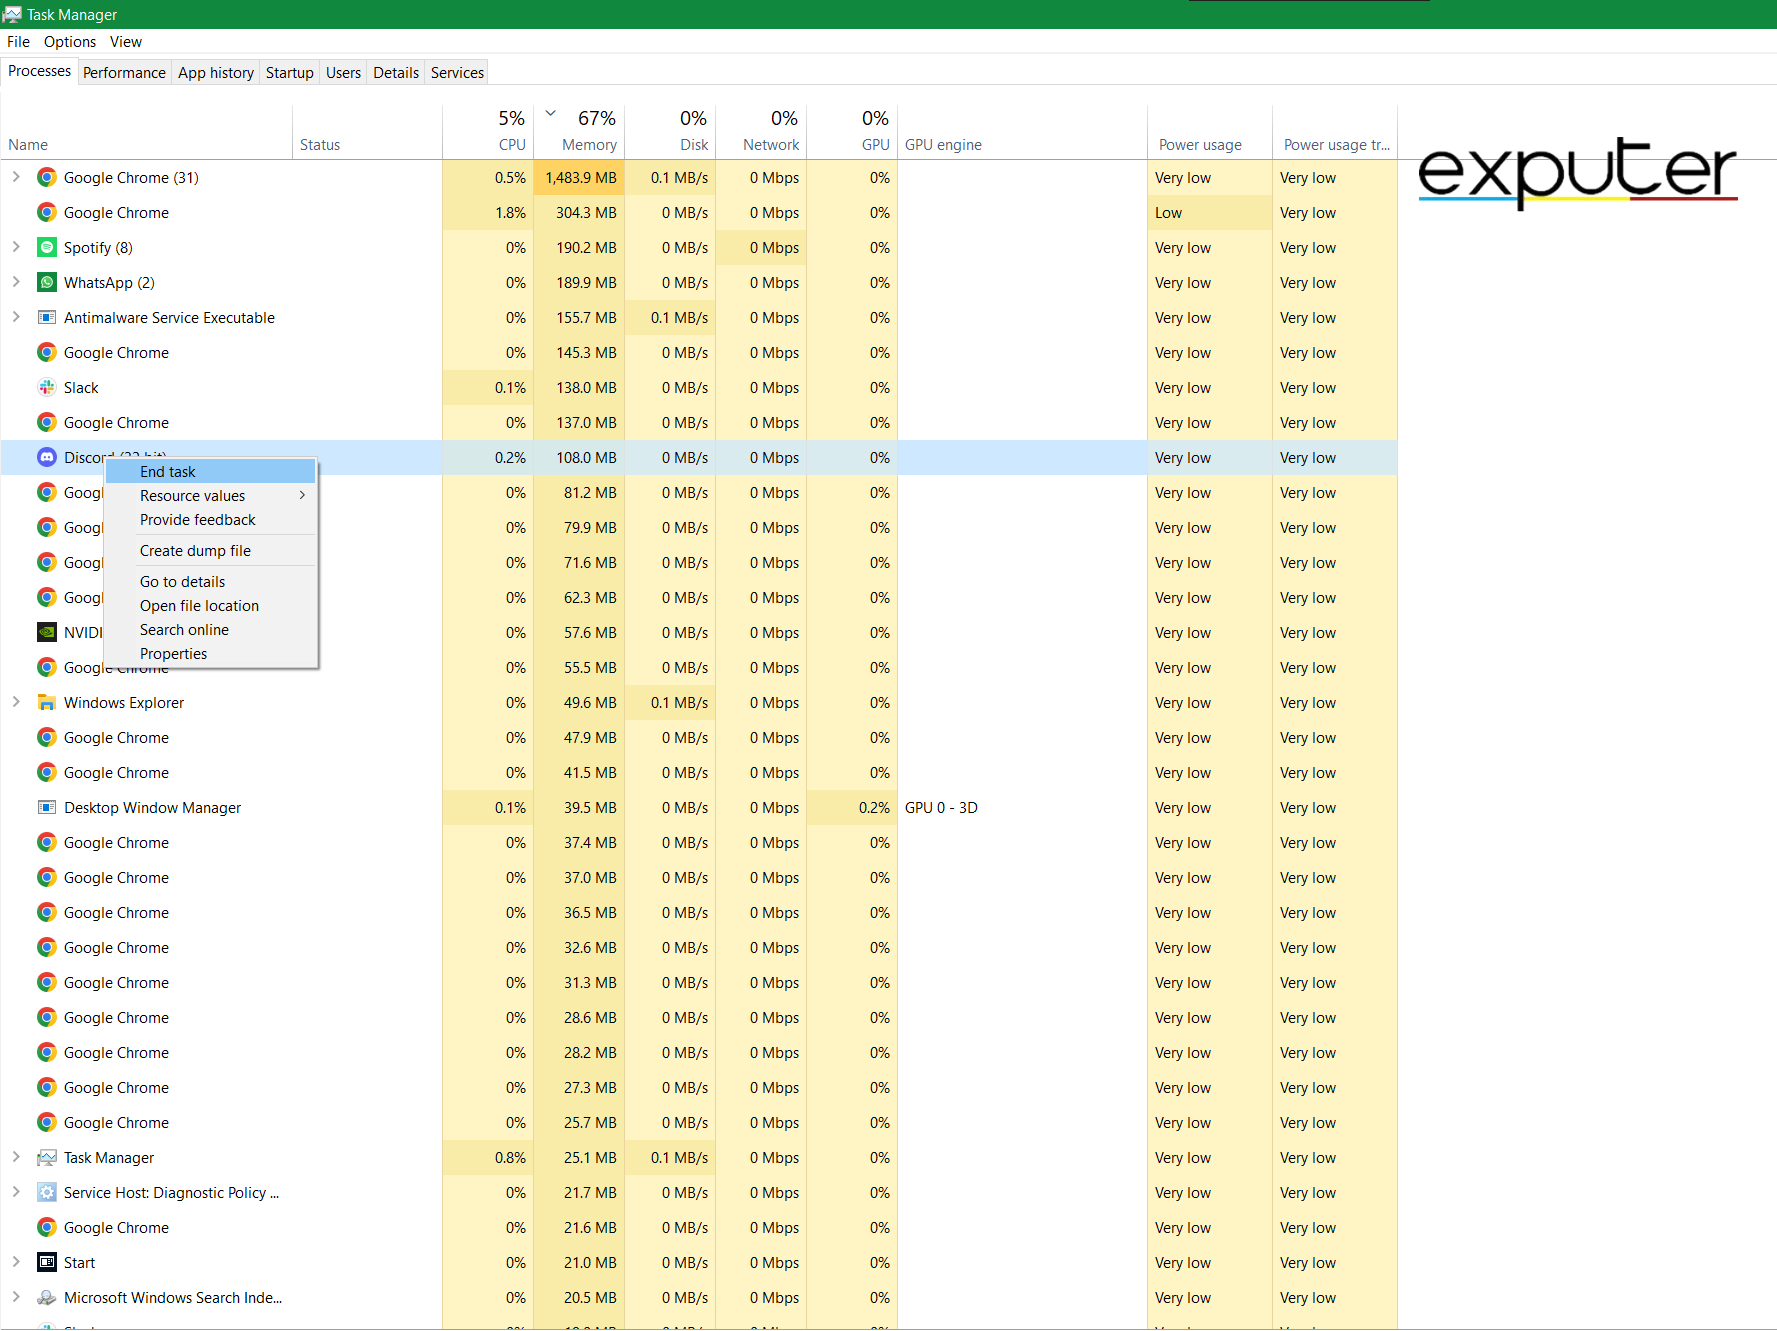 How to end tasks to end Remnant 2 unhandled exception error